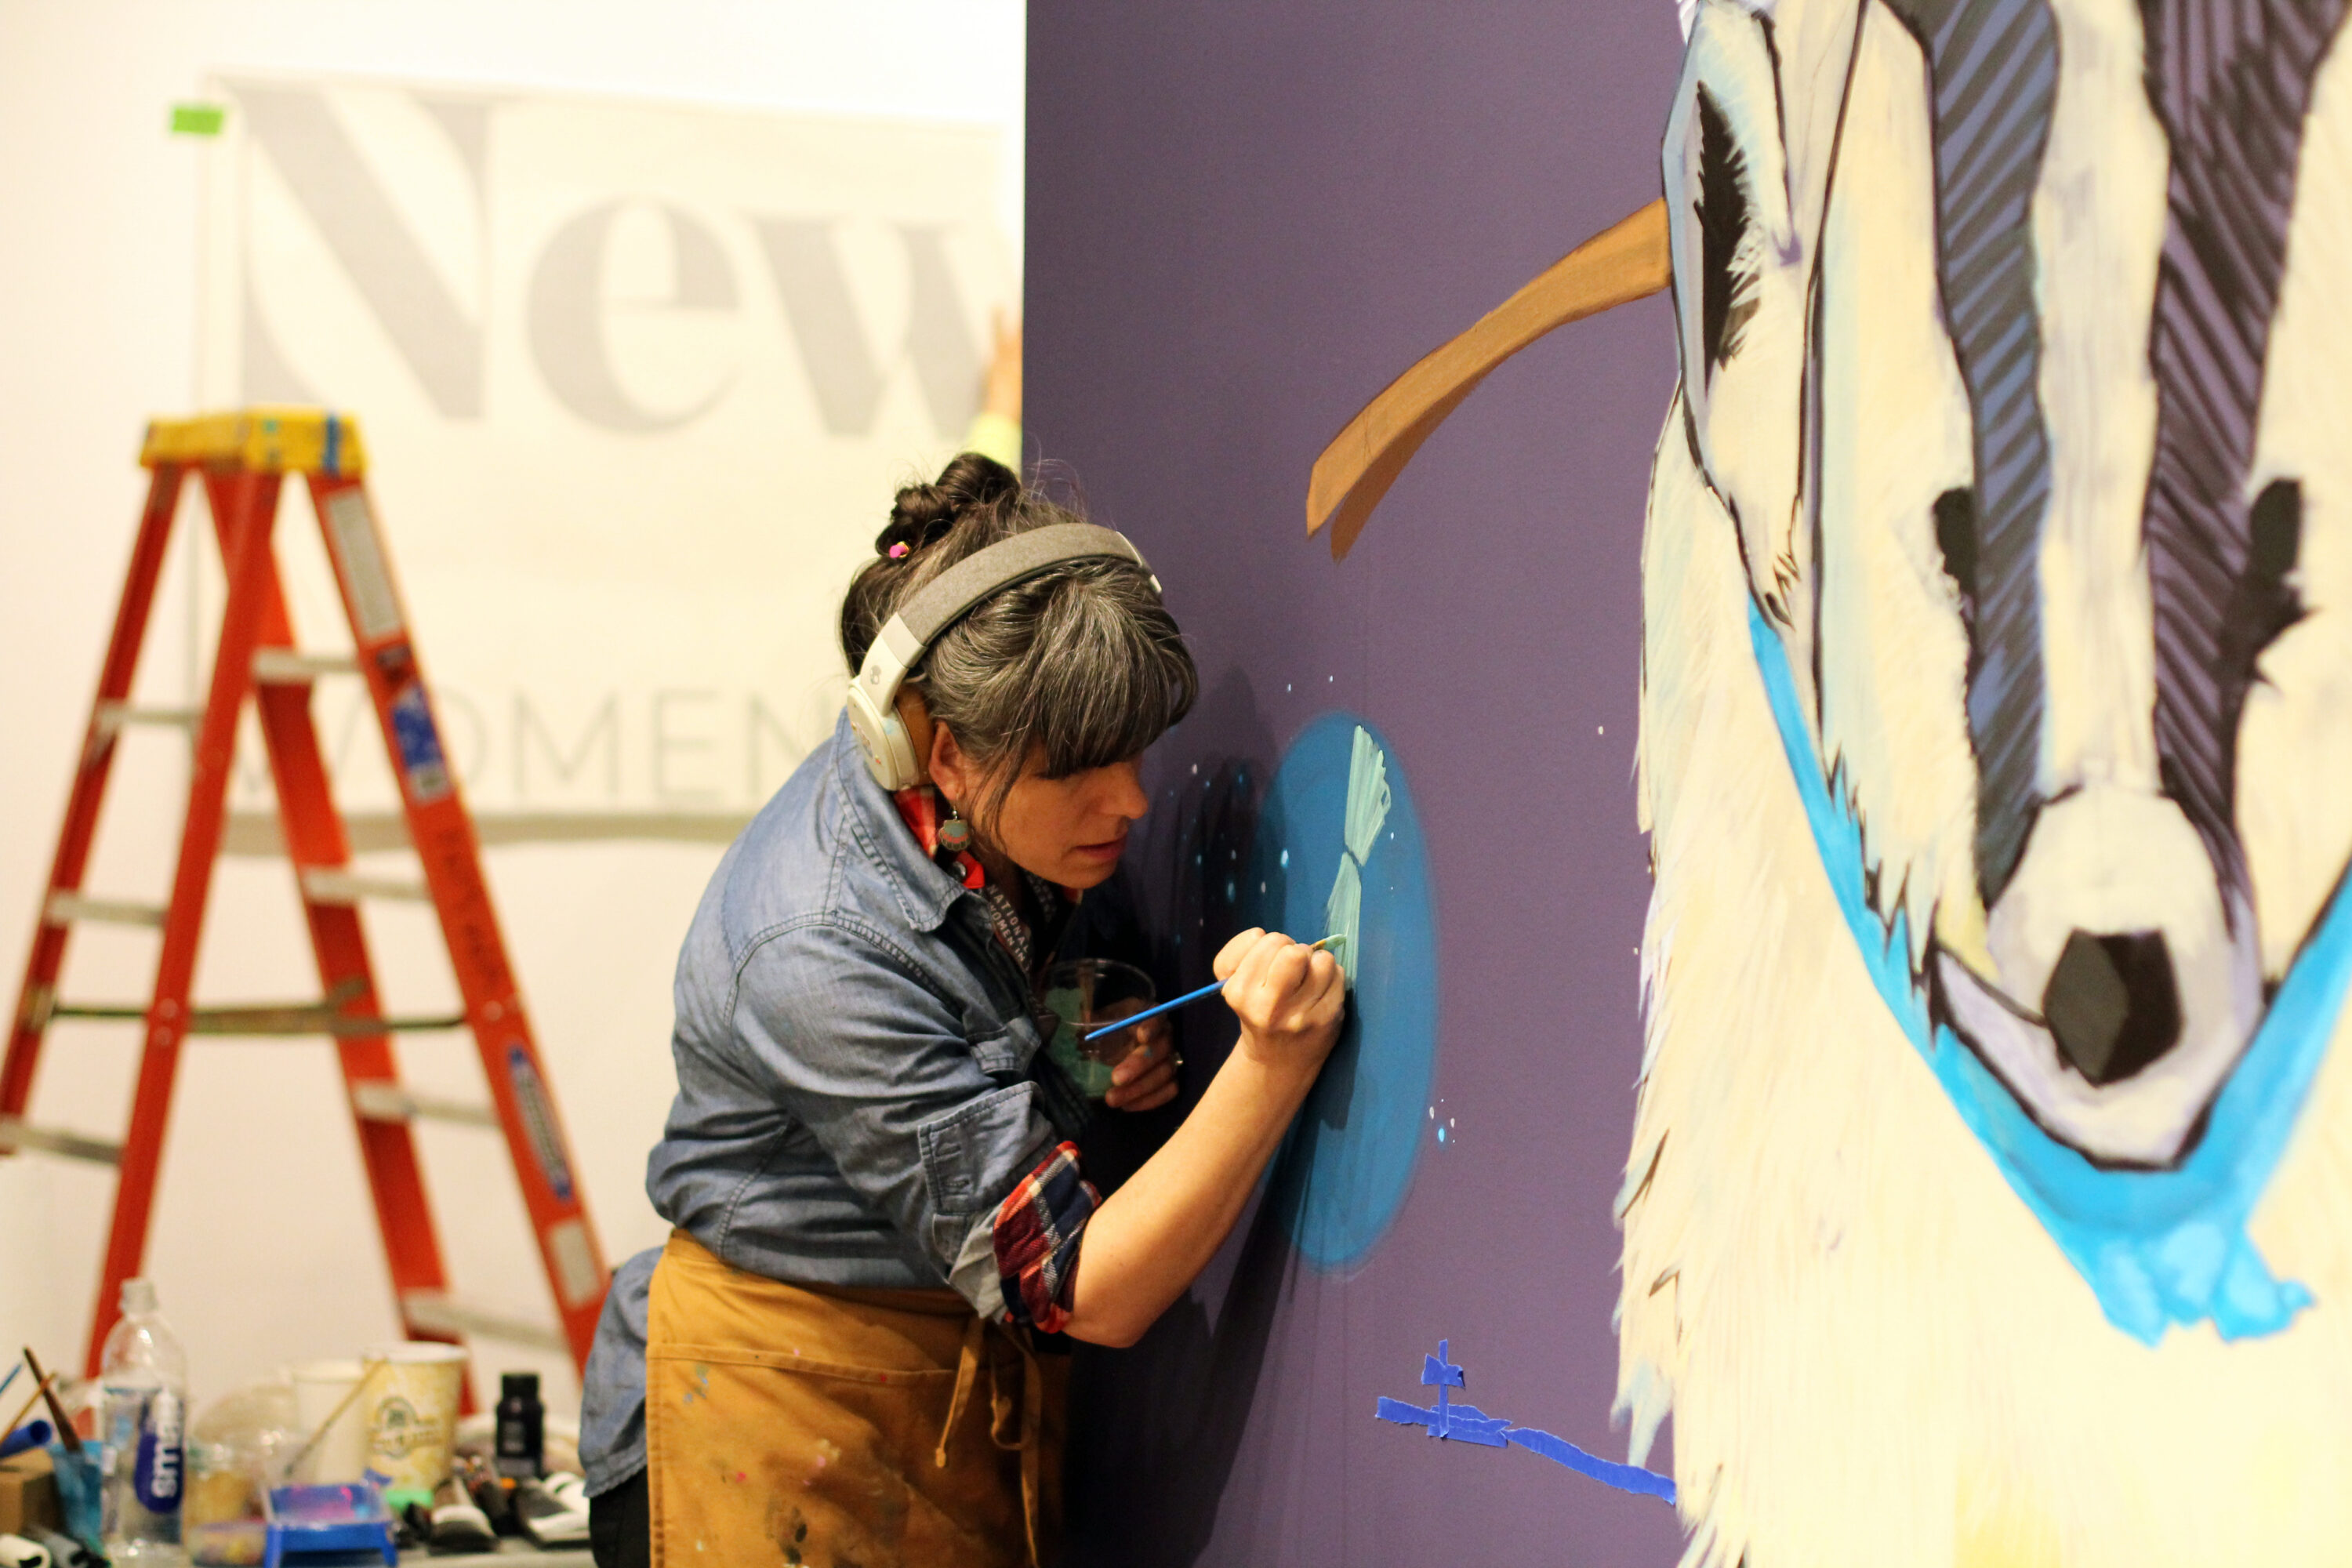 A woman artist paints a mural on a wall of a museum gallery.